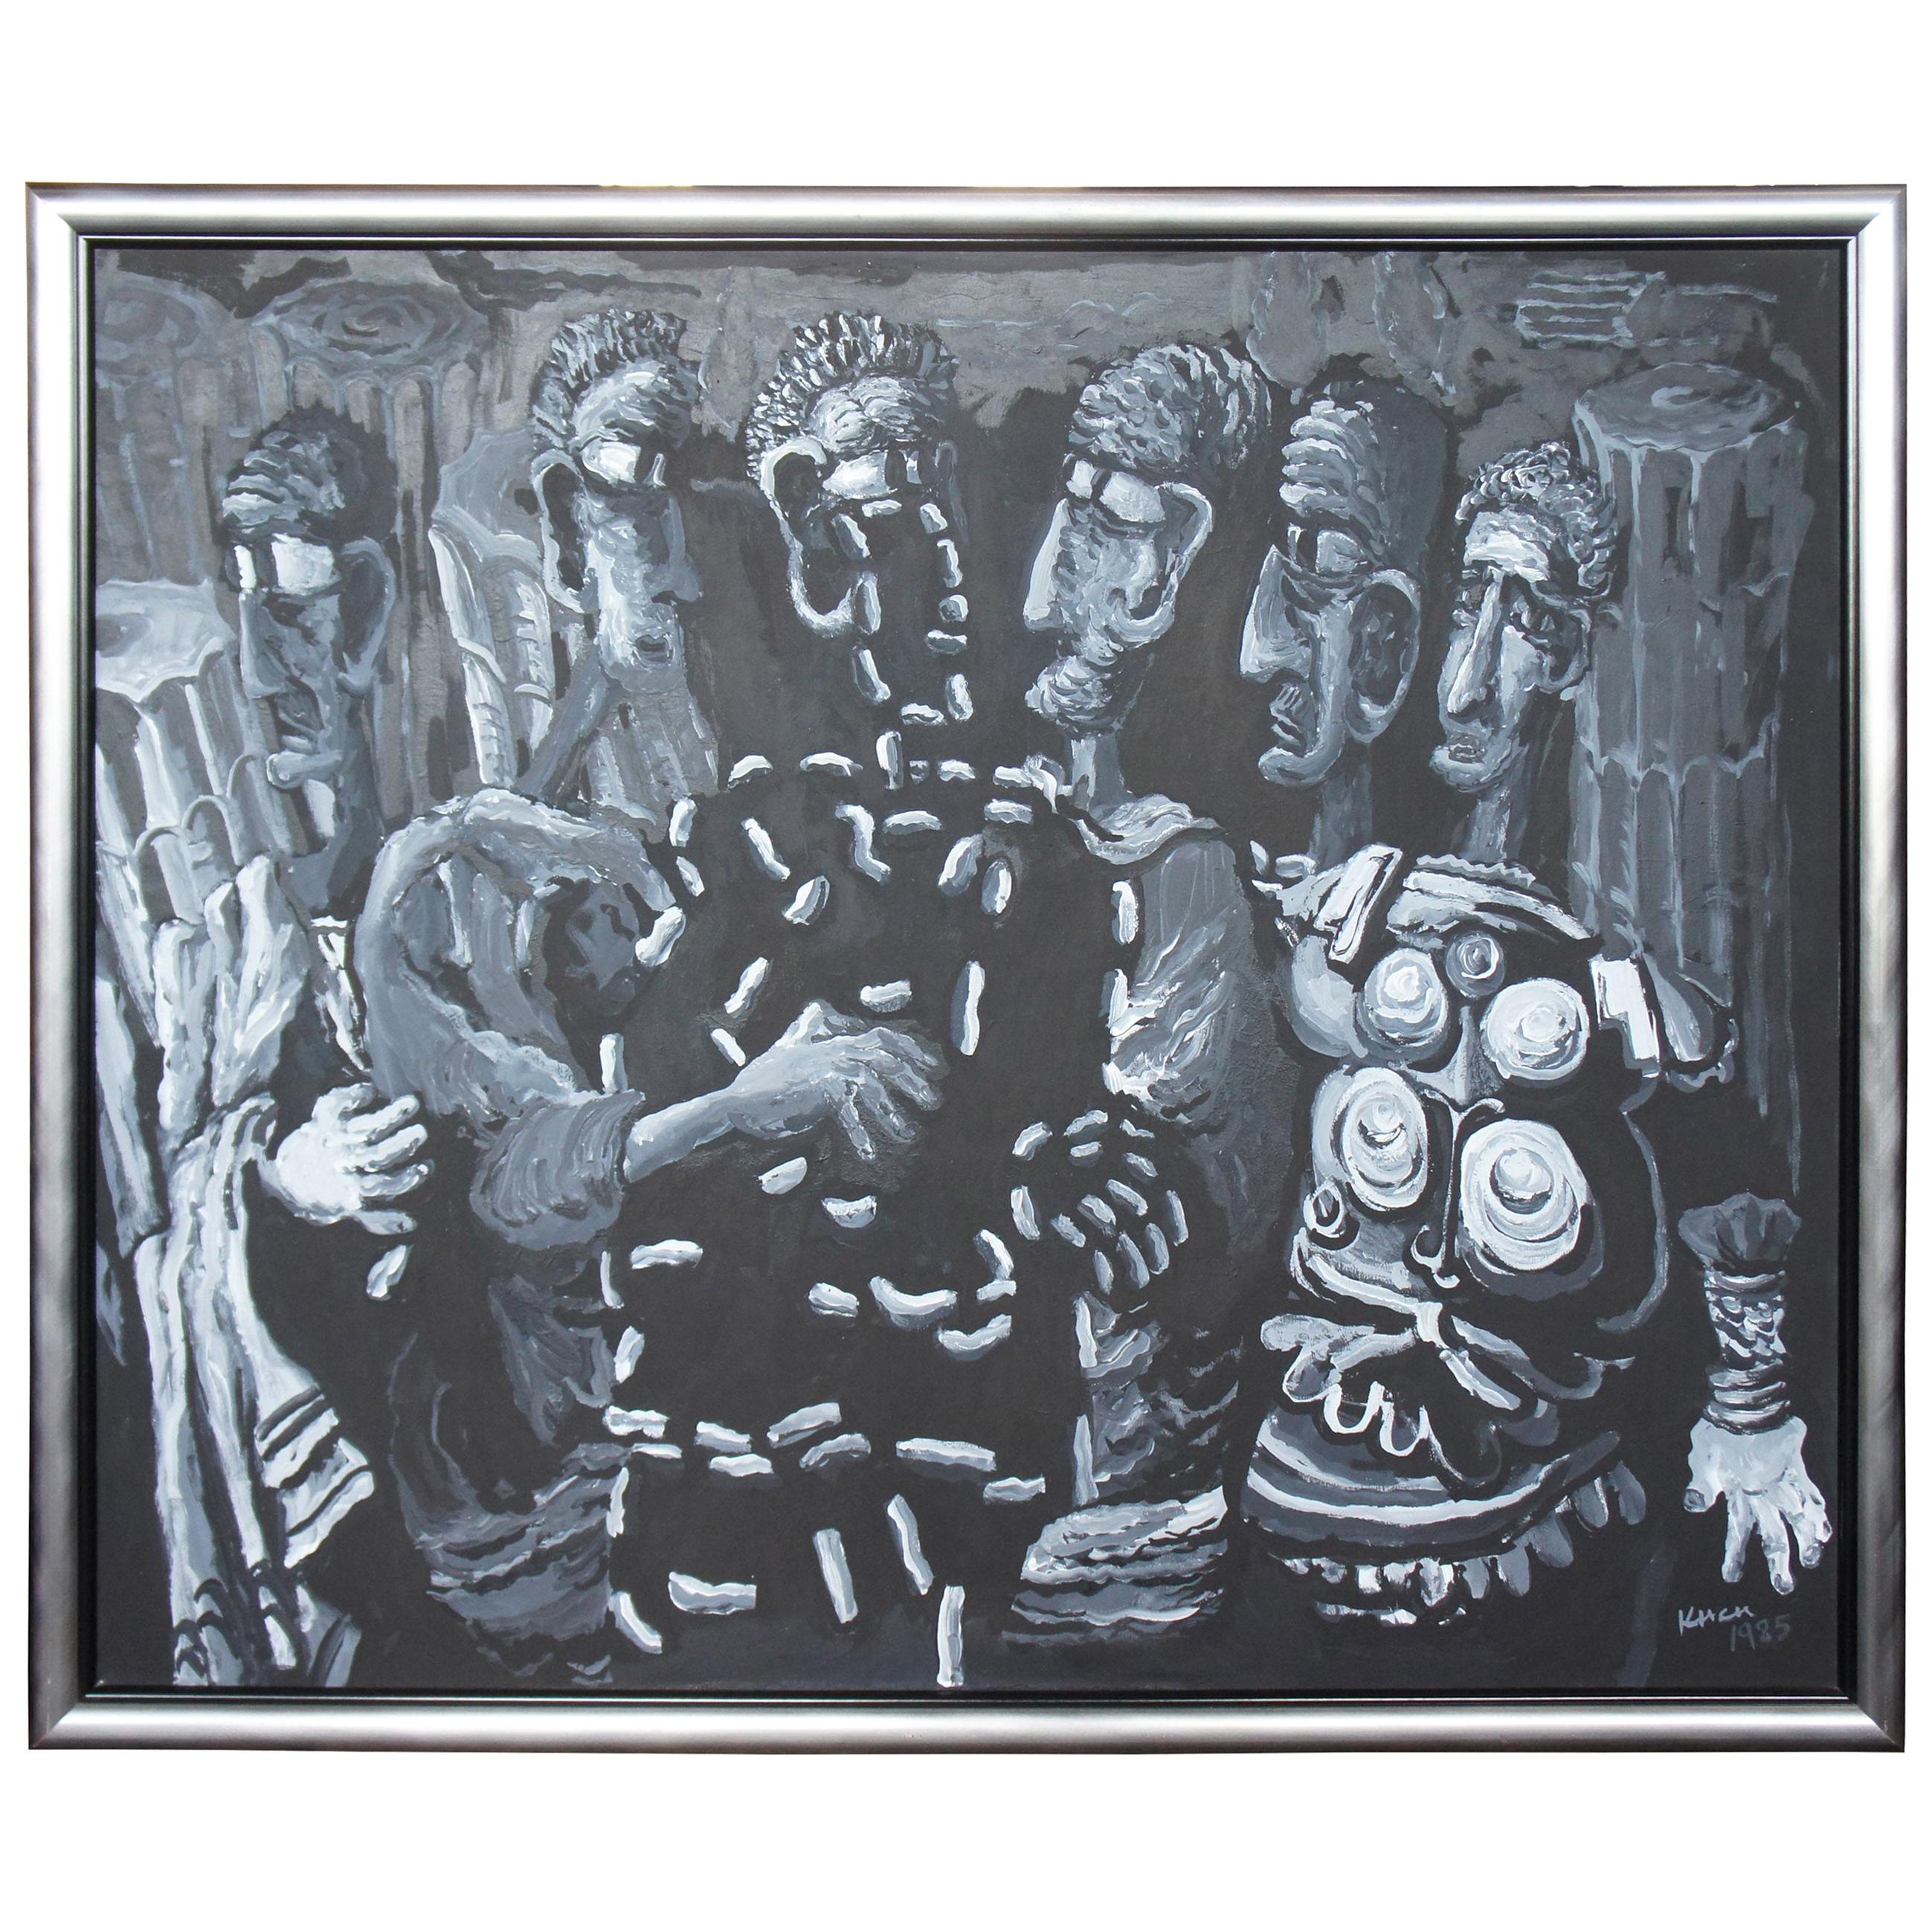 The Senate by Tom Keesee 1985 Black and White Expressionist Acrylic Painting For Sale